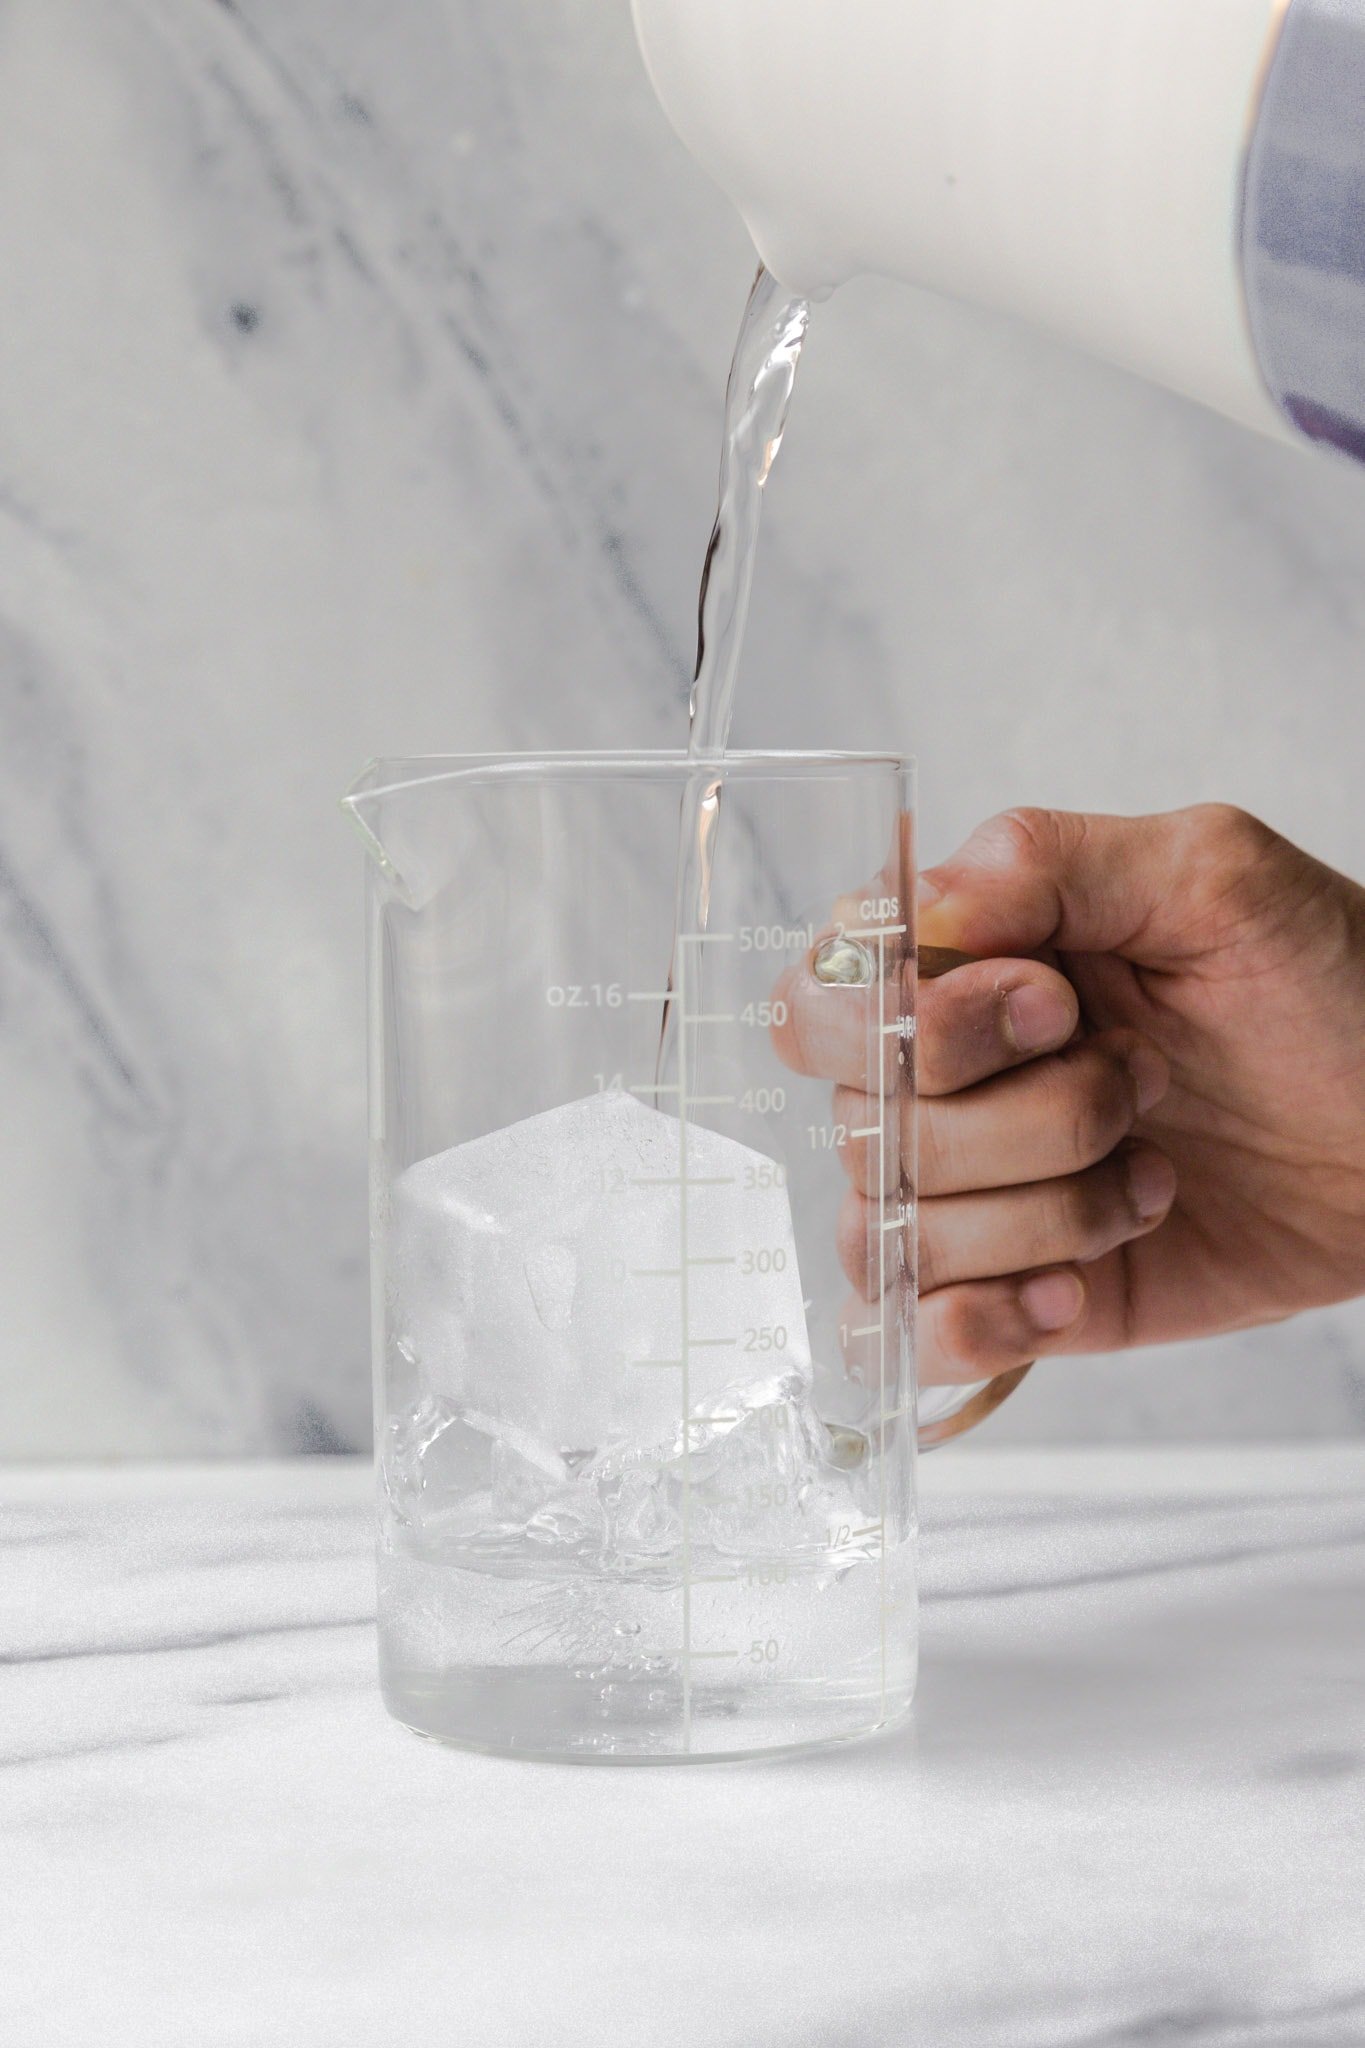 Water being poured into a measuring cup with ice cubes to prepare ice water for Kashmiri Chai